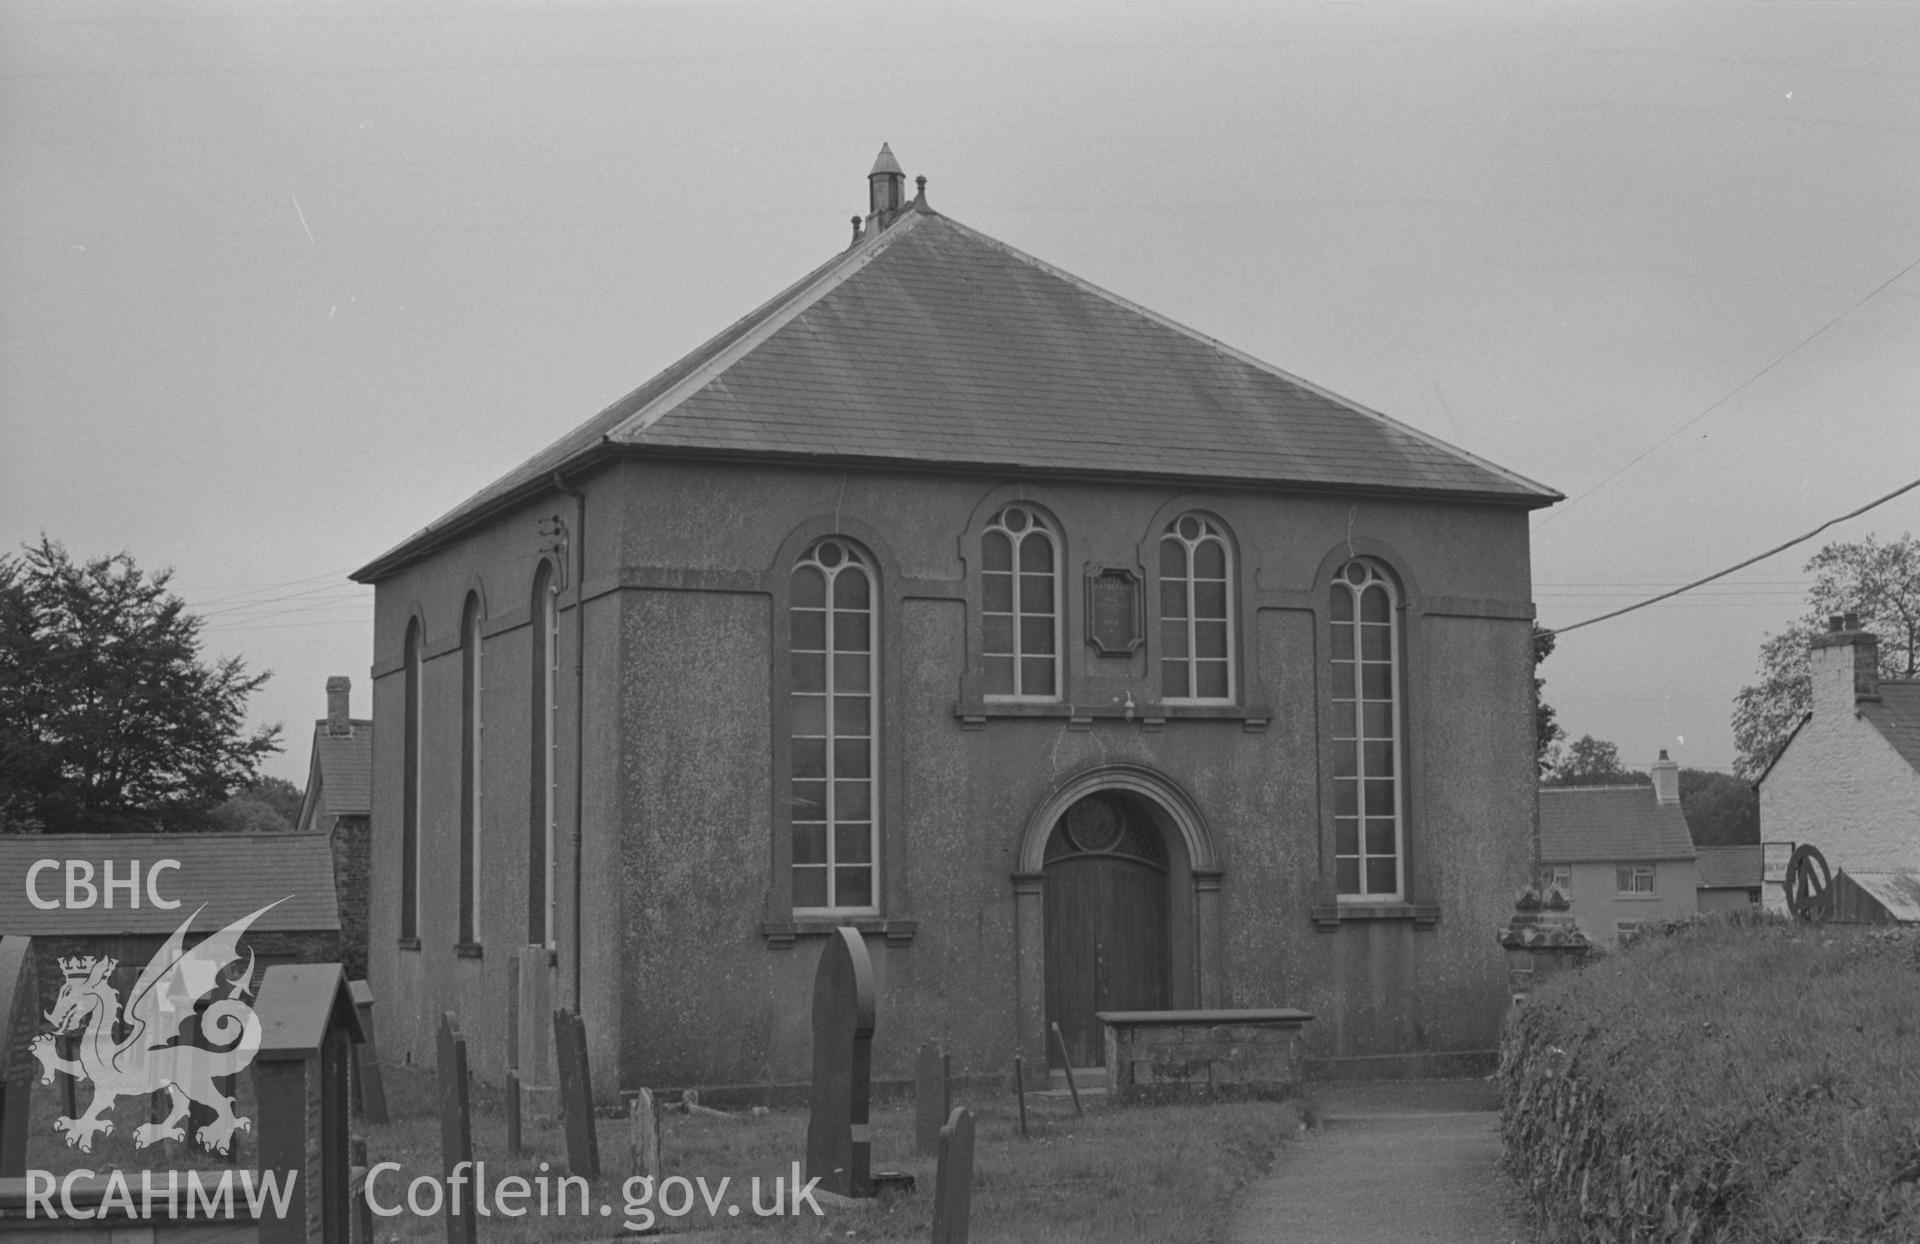 Digital copy of a black and white negative showing external view of Capel Pant-y-Defaid Welsh Unitarian chapel, Pren-Gwyn, Llandysul. Photographed by Arthur O. Chater in September 1966 looking south west from Grid Reference SN 425 442.